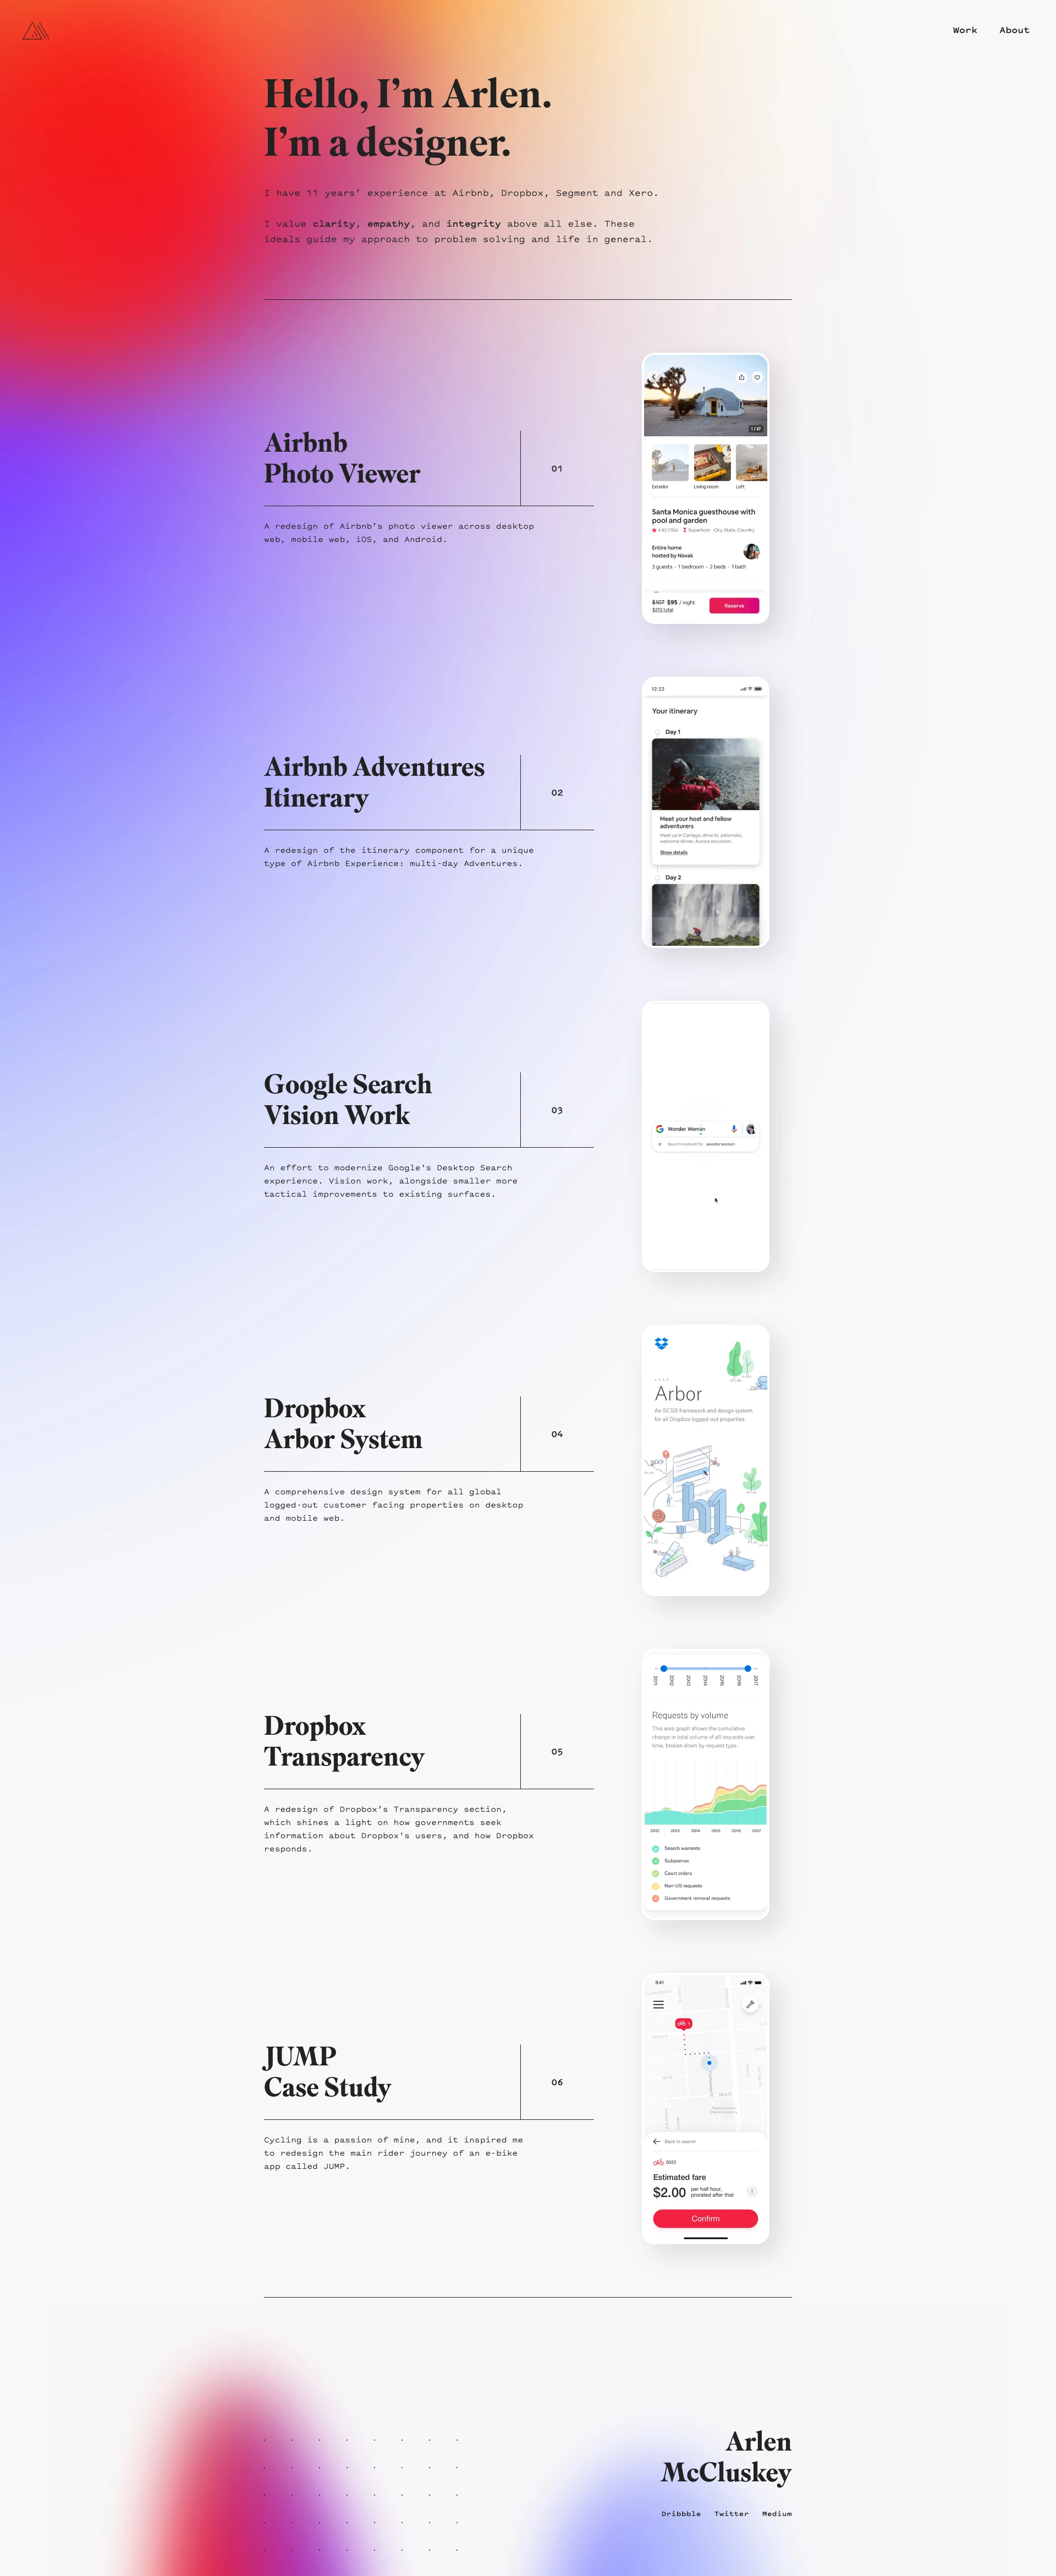 Arlen McCluskey Landing Page Example: I have 11 years’ experience at Airbnb, Dropbox, Segment and Xero. ‍I value clarity, empathy, and integrity above all else. These ideals guide my approach to problem solving and life in general.